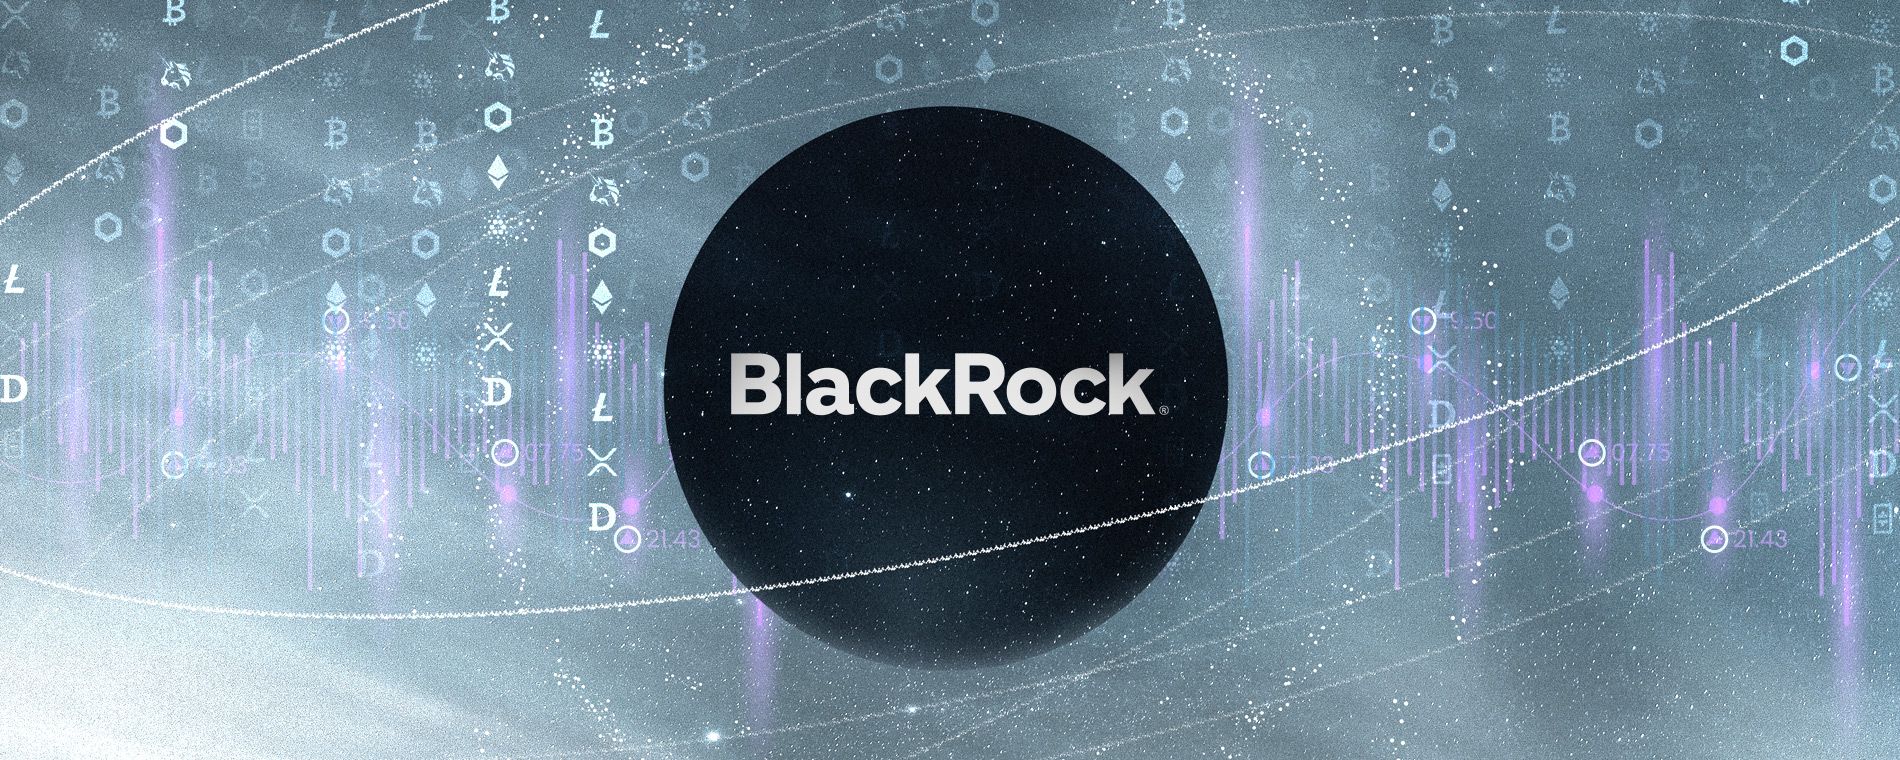 BlackRock to offer crypto trading services